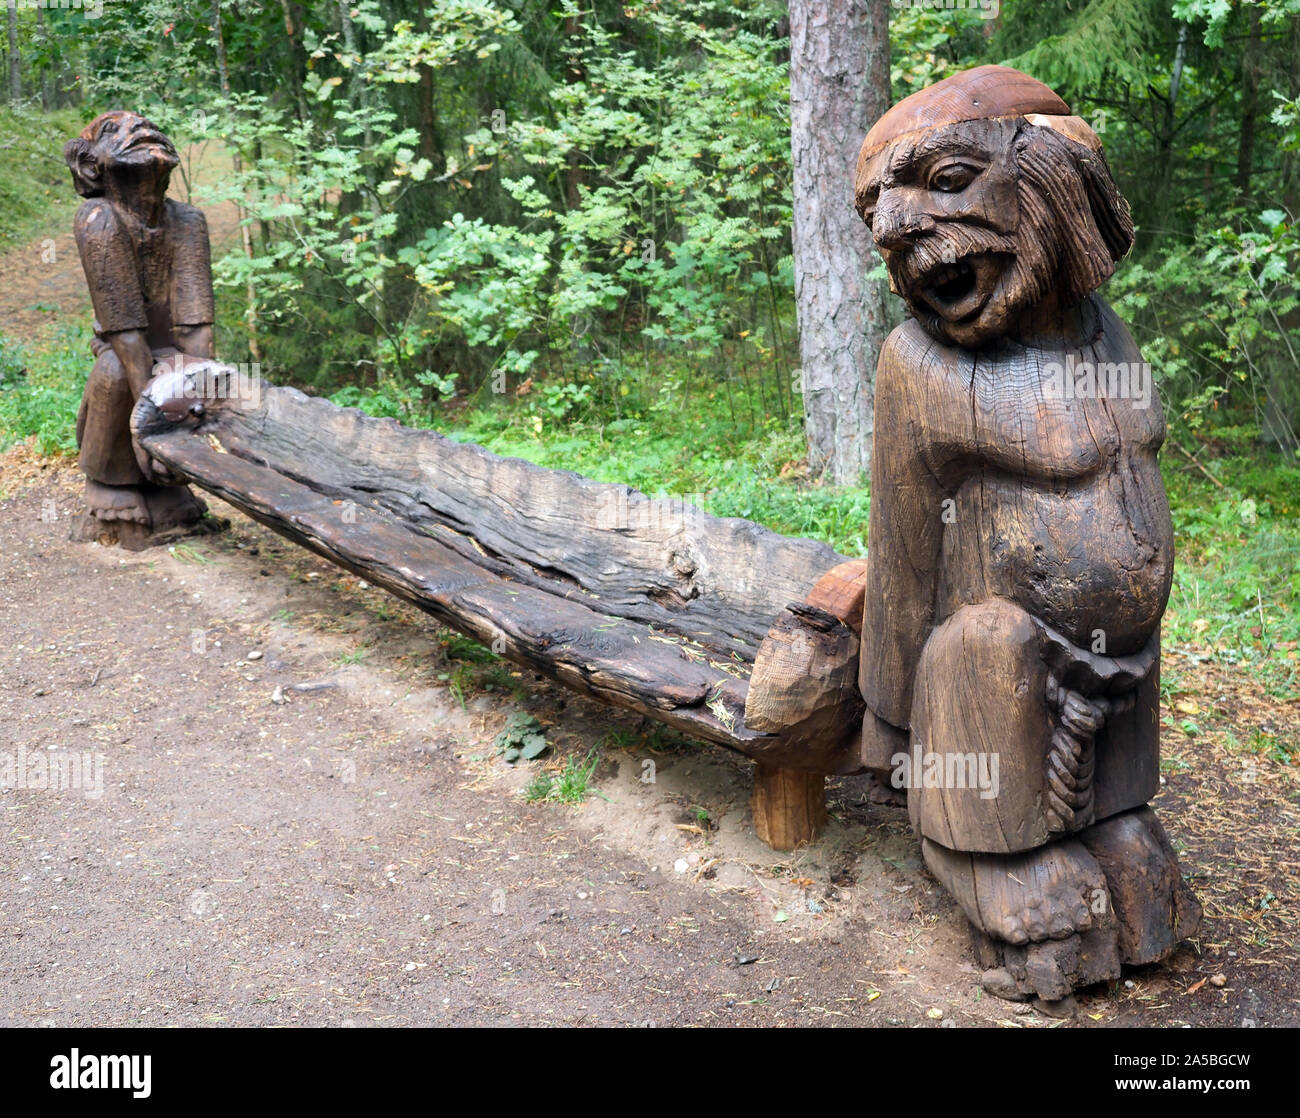 Wooden sculptures, witch mountain in Juodkrante, Kuroeiu Nerija National Park on the Curonian Spit in Lithuania Stock Photo